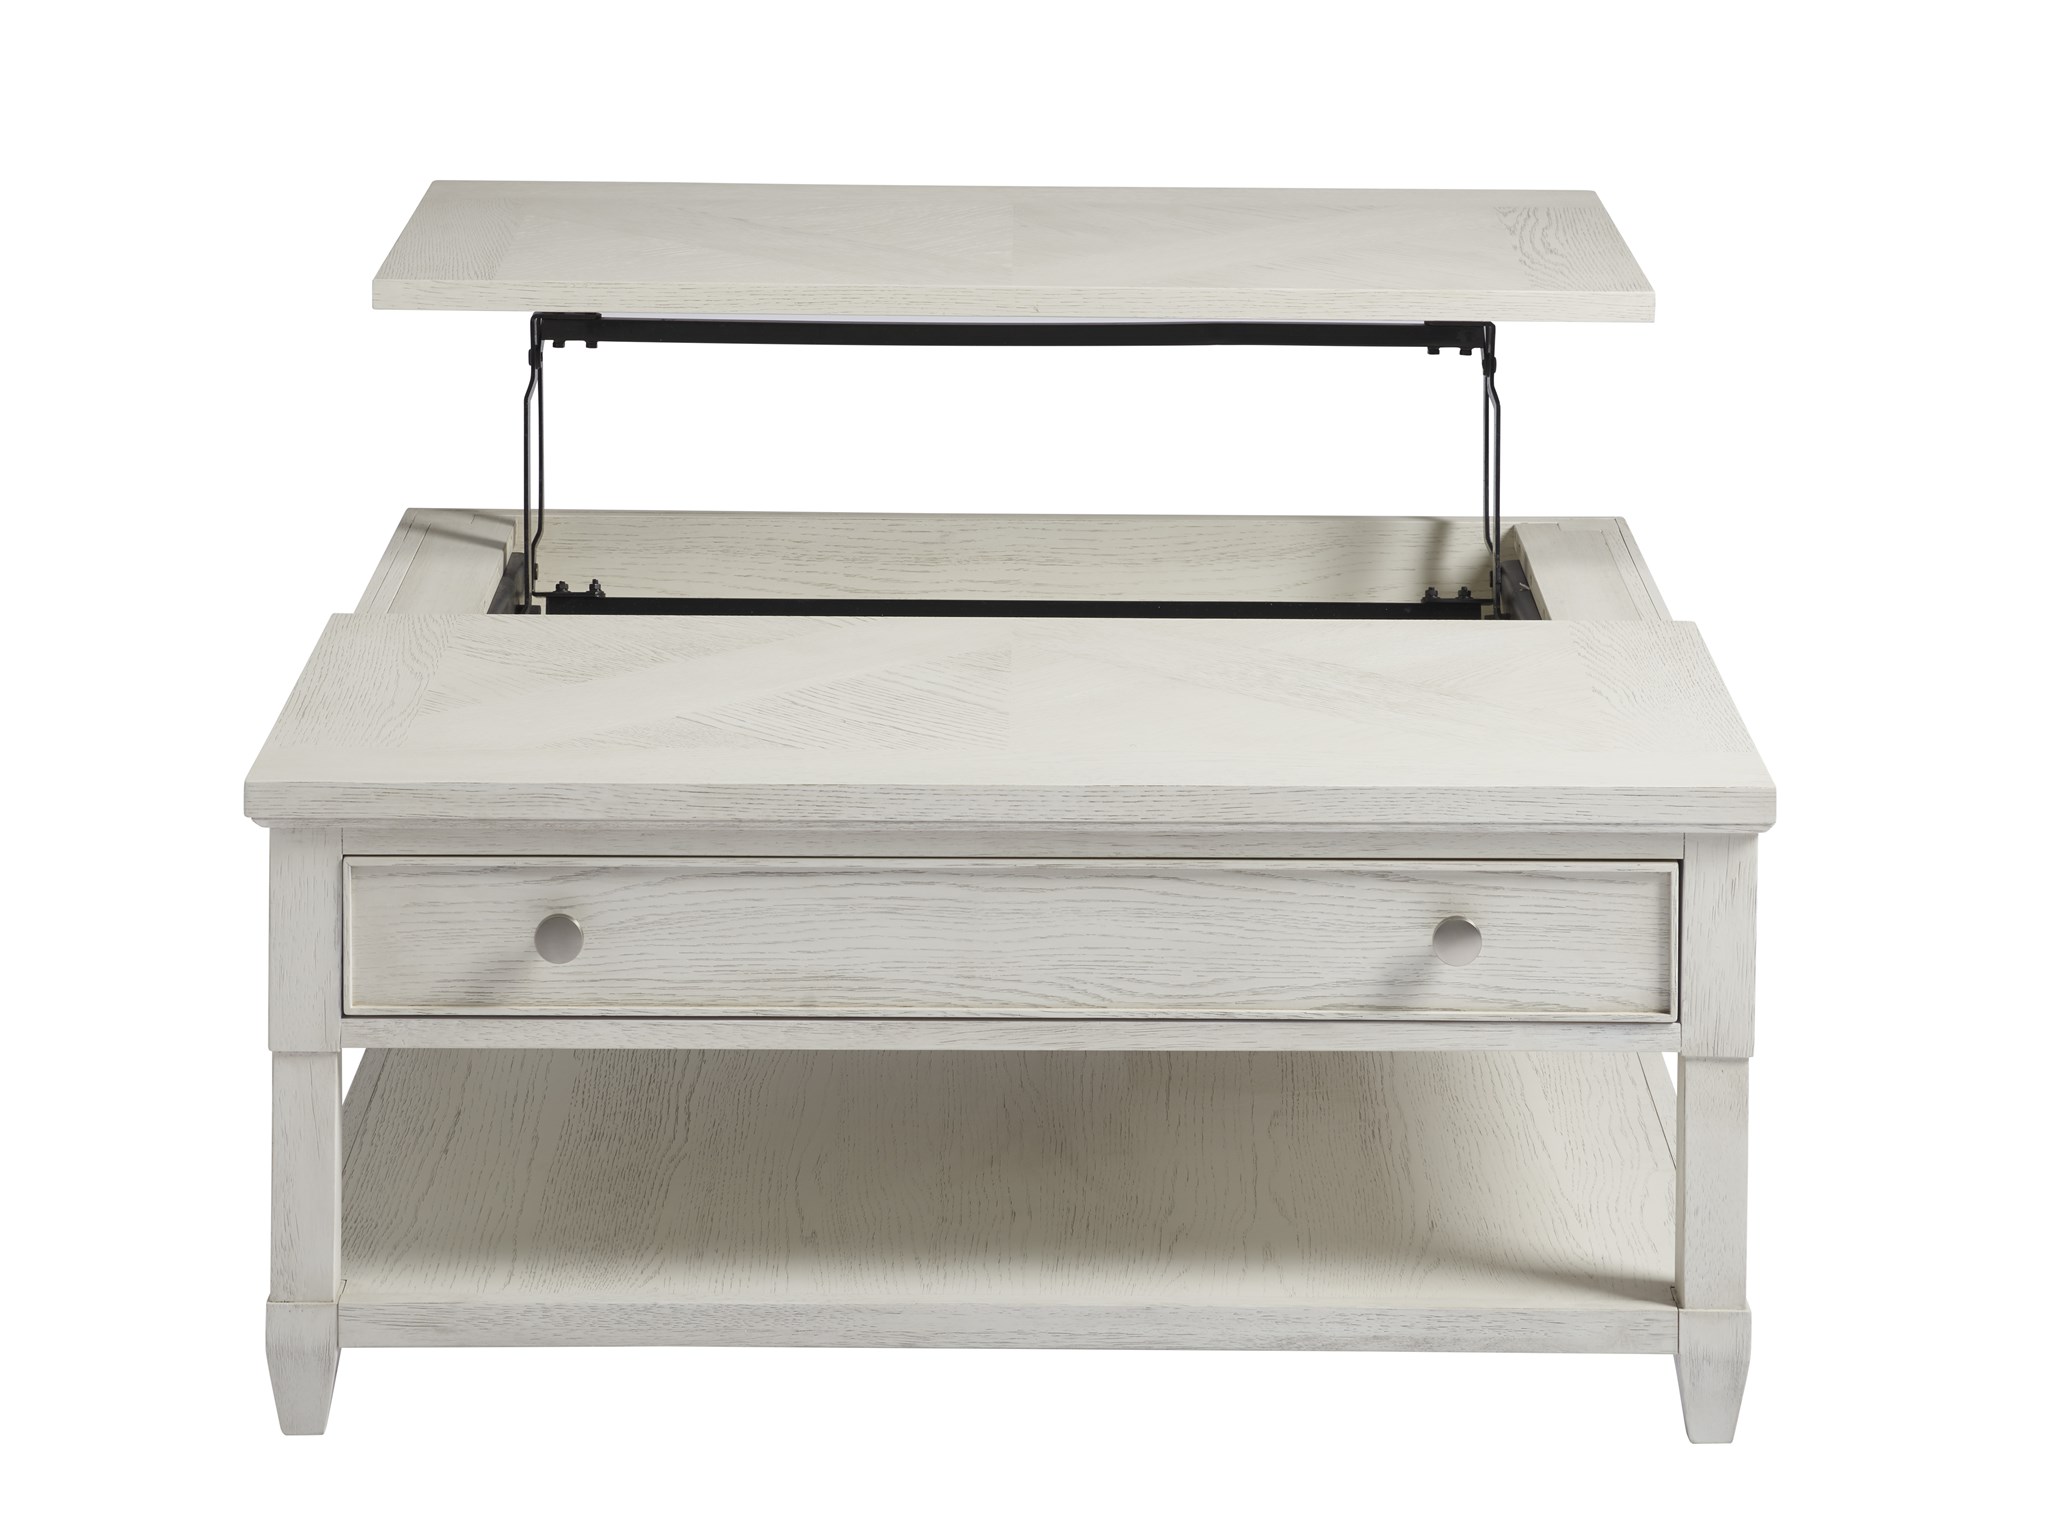 Topsail Lifttop Table